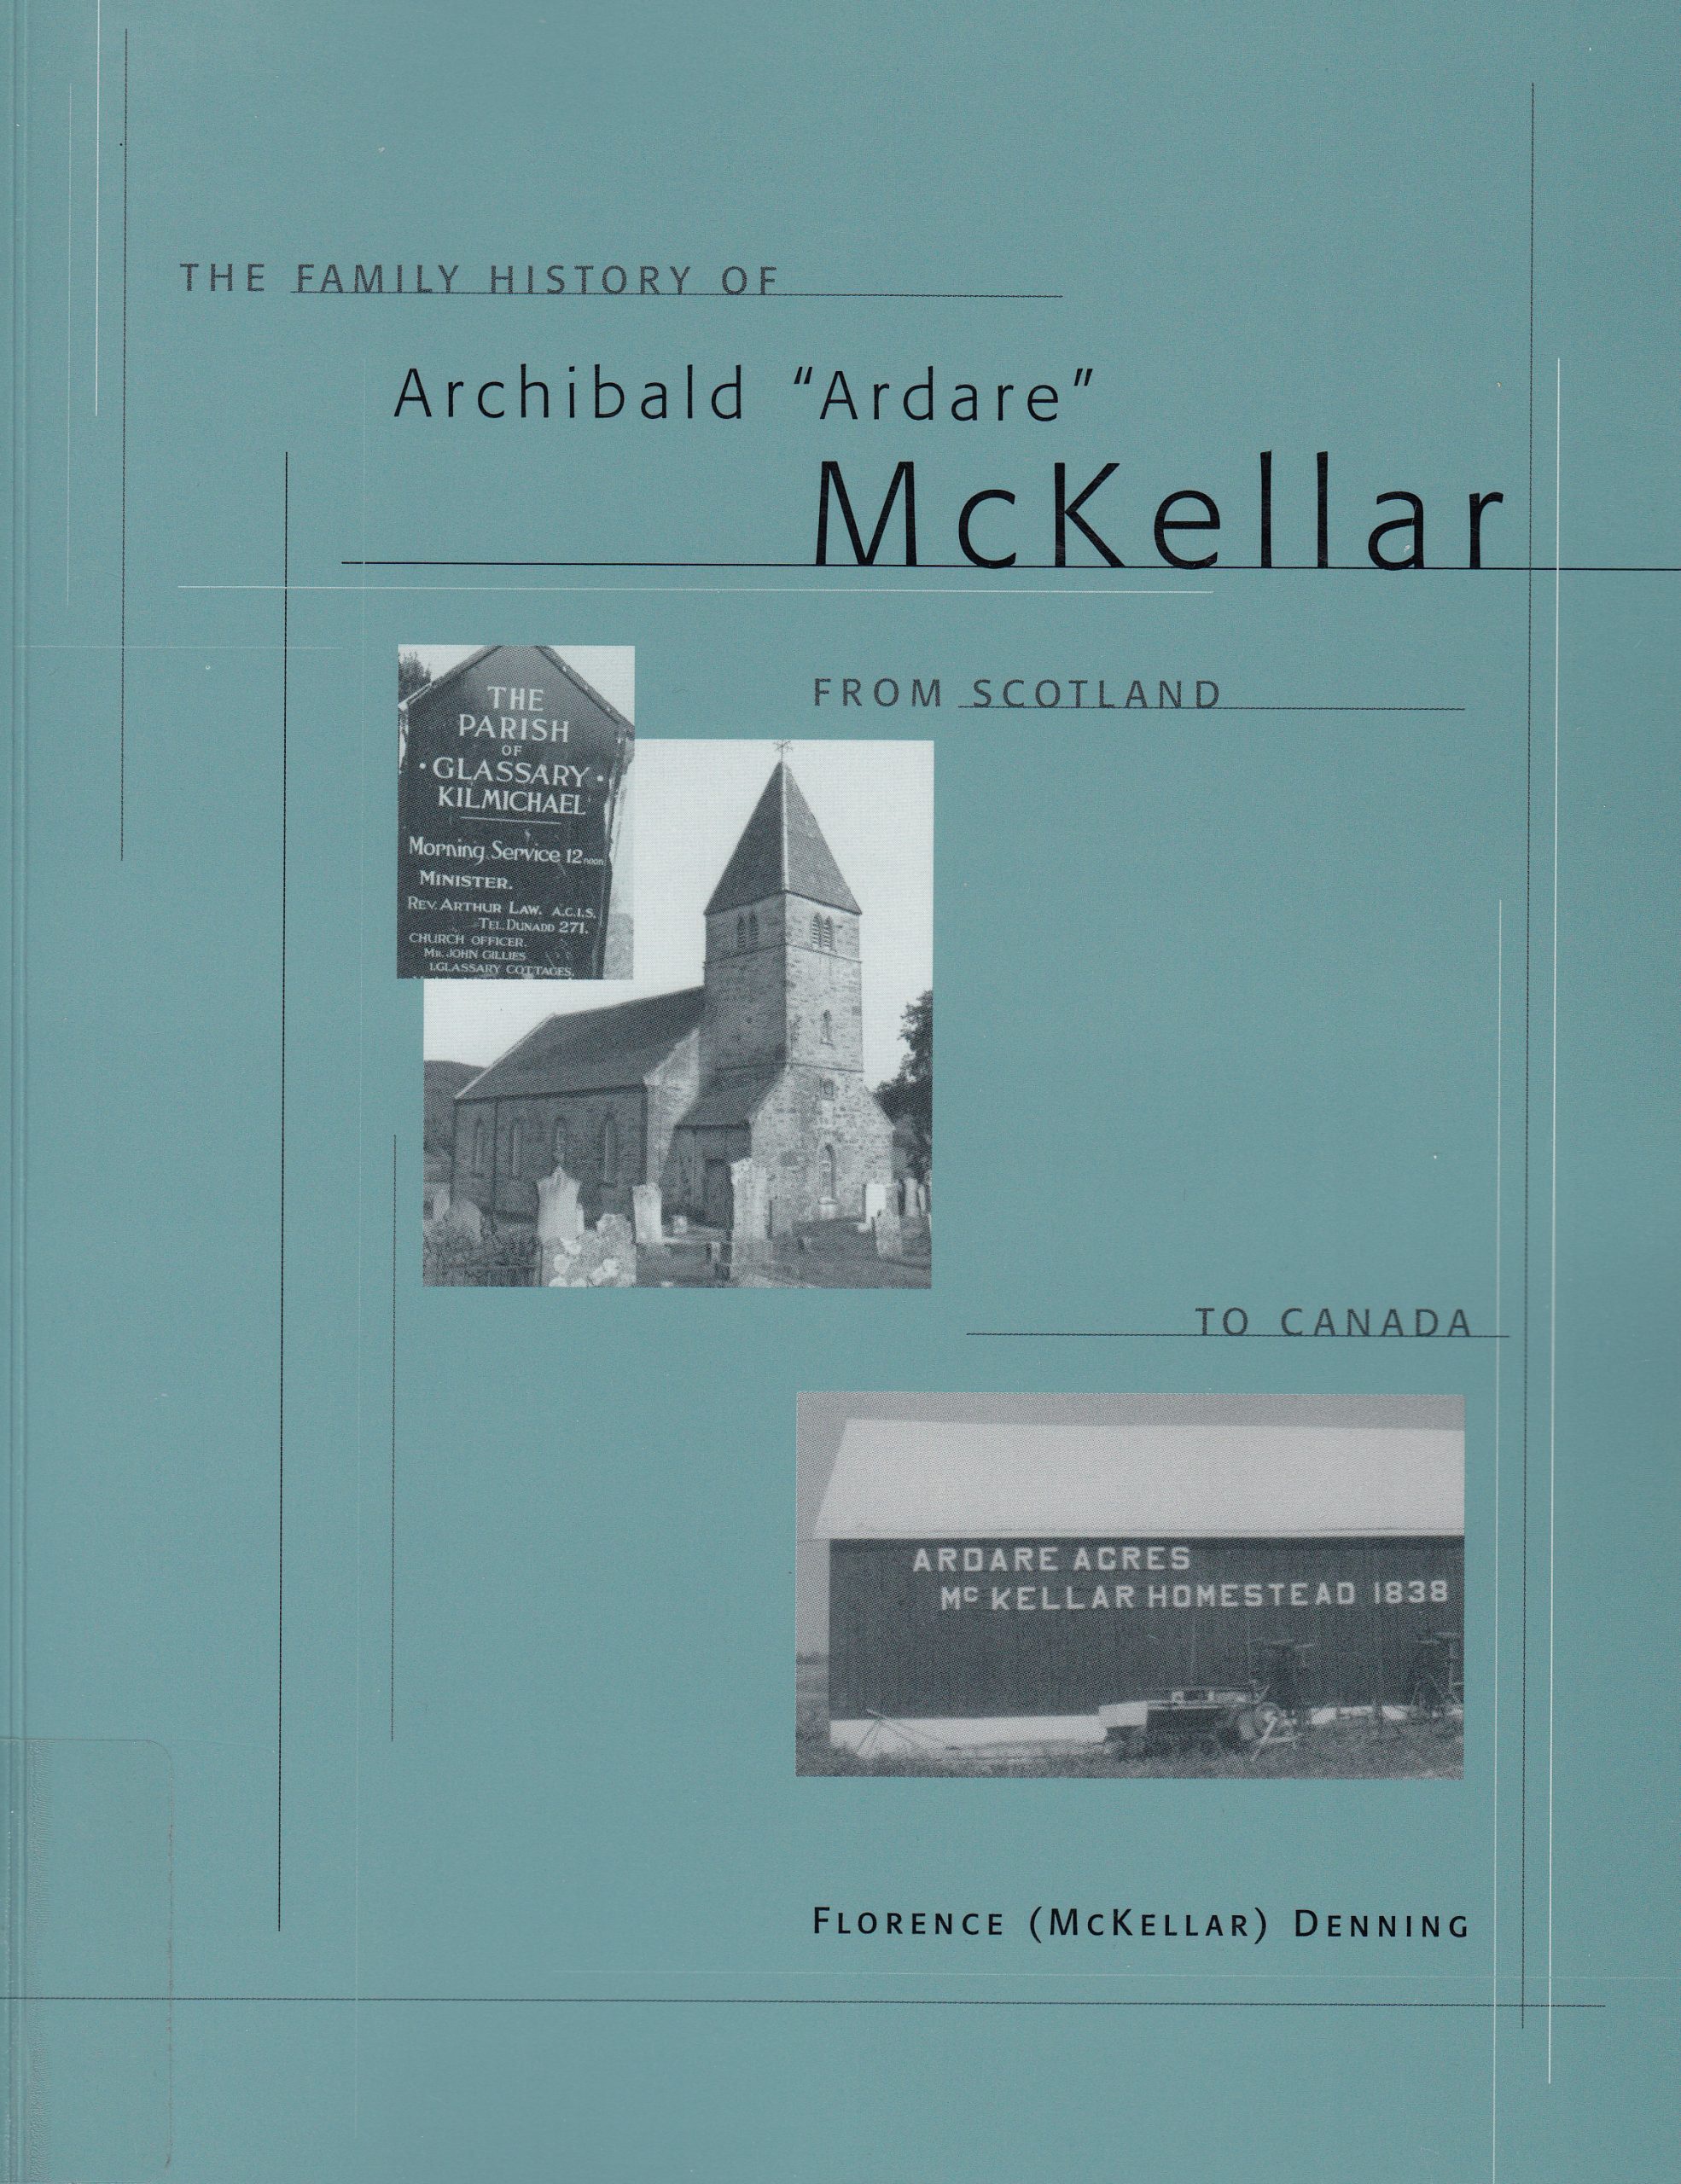 The Family History of Archibald "Ardare" McKellar from Scotland to